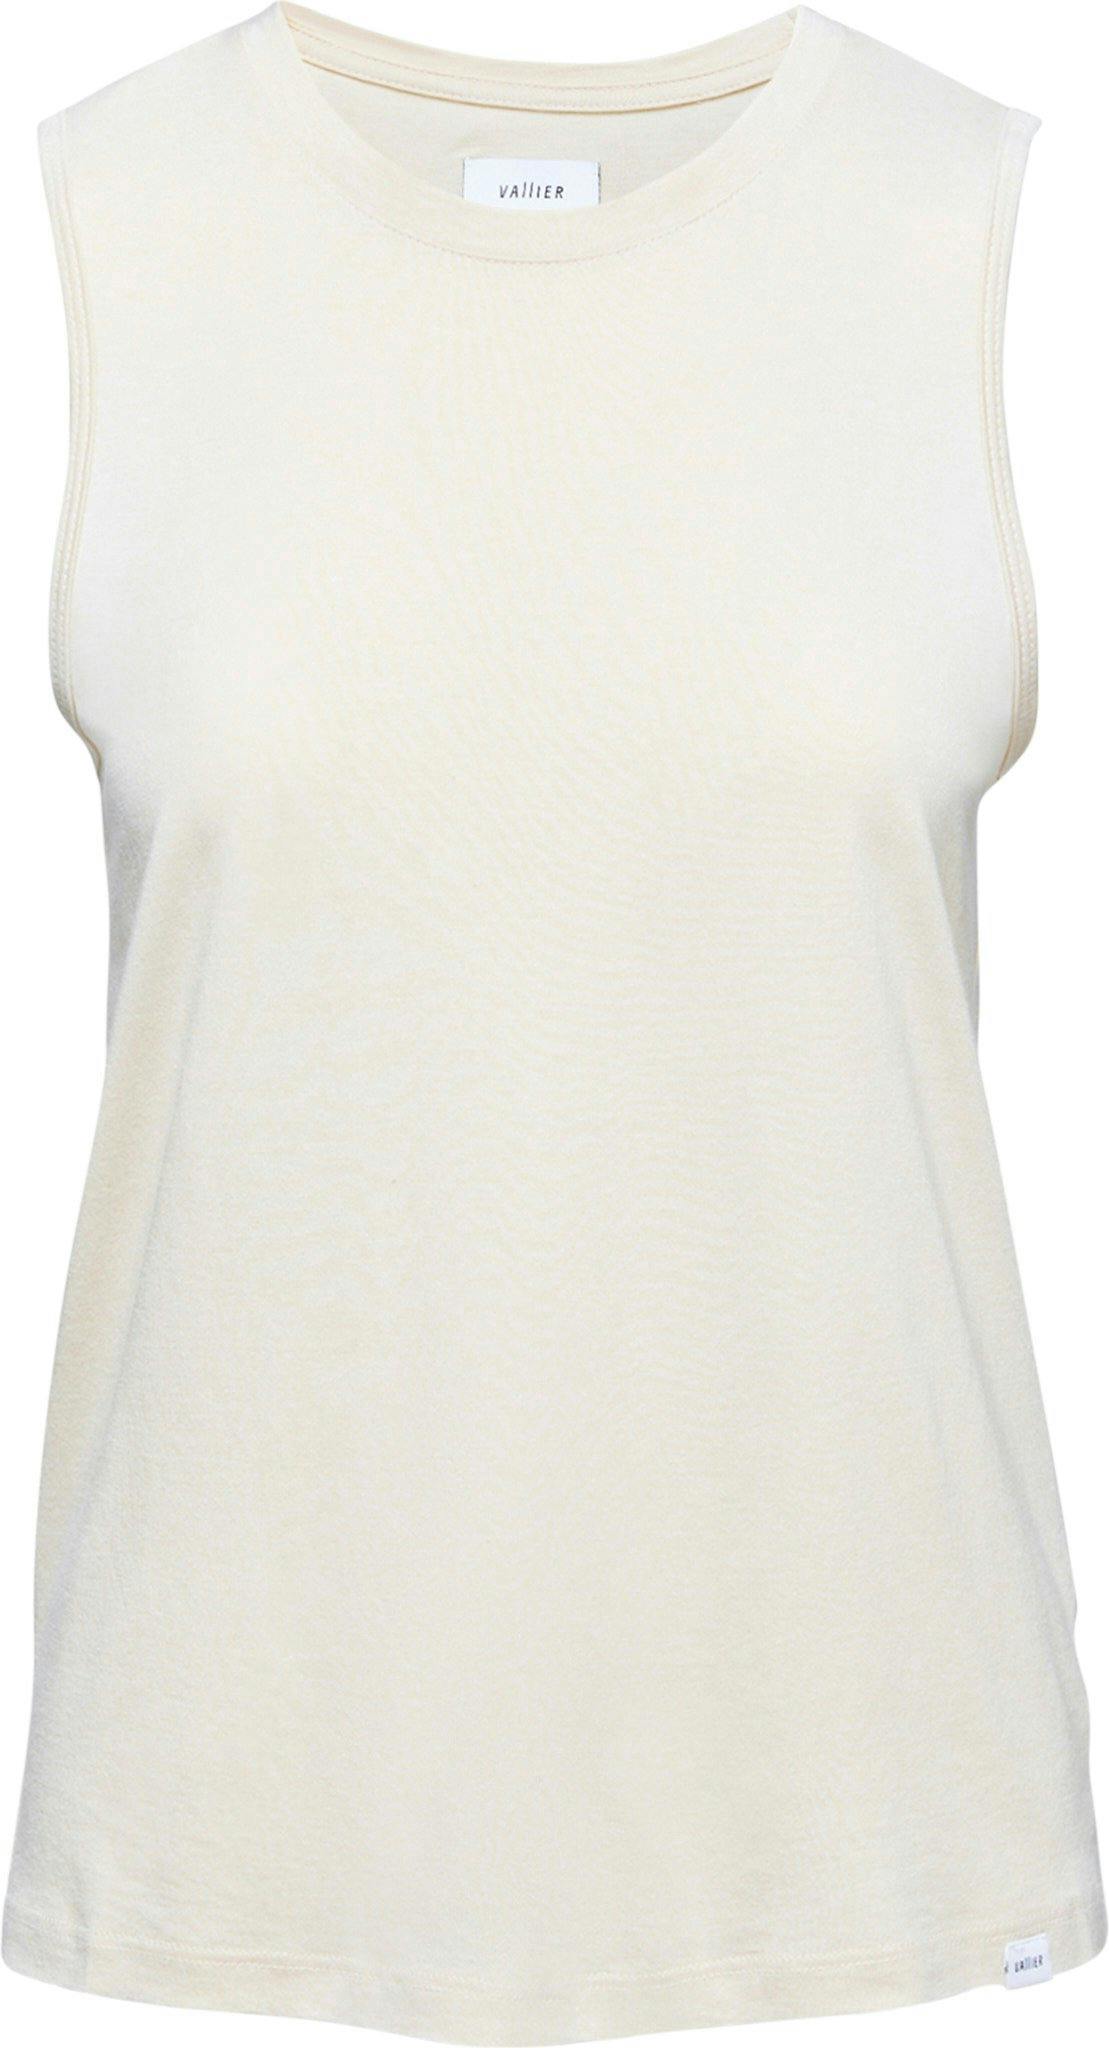 Product image for Barranco Sleeveless Top - Women's